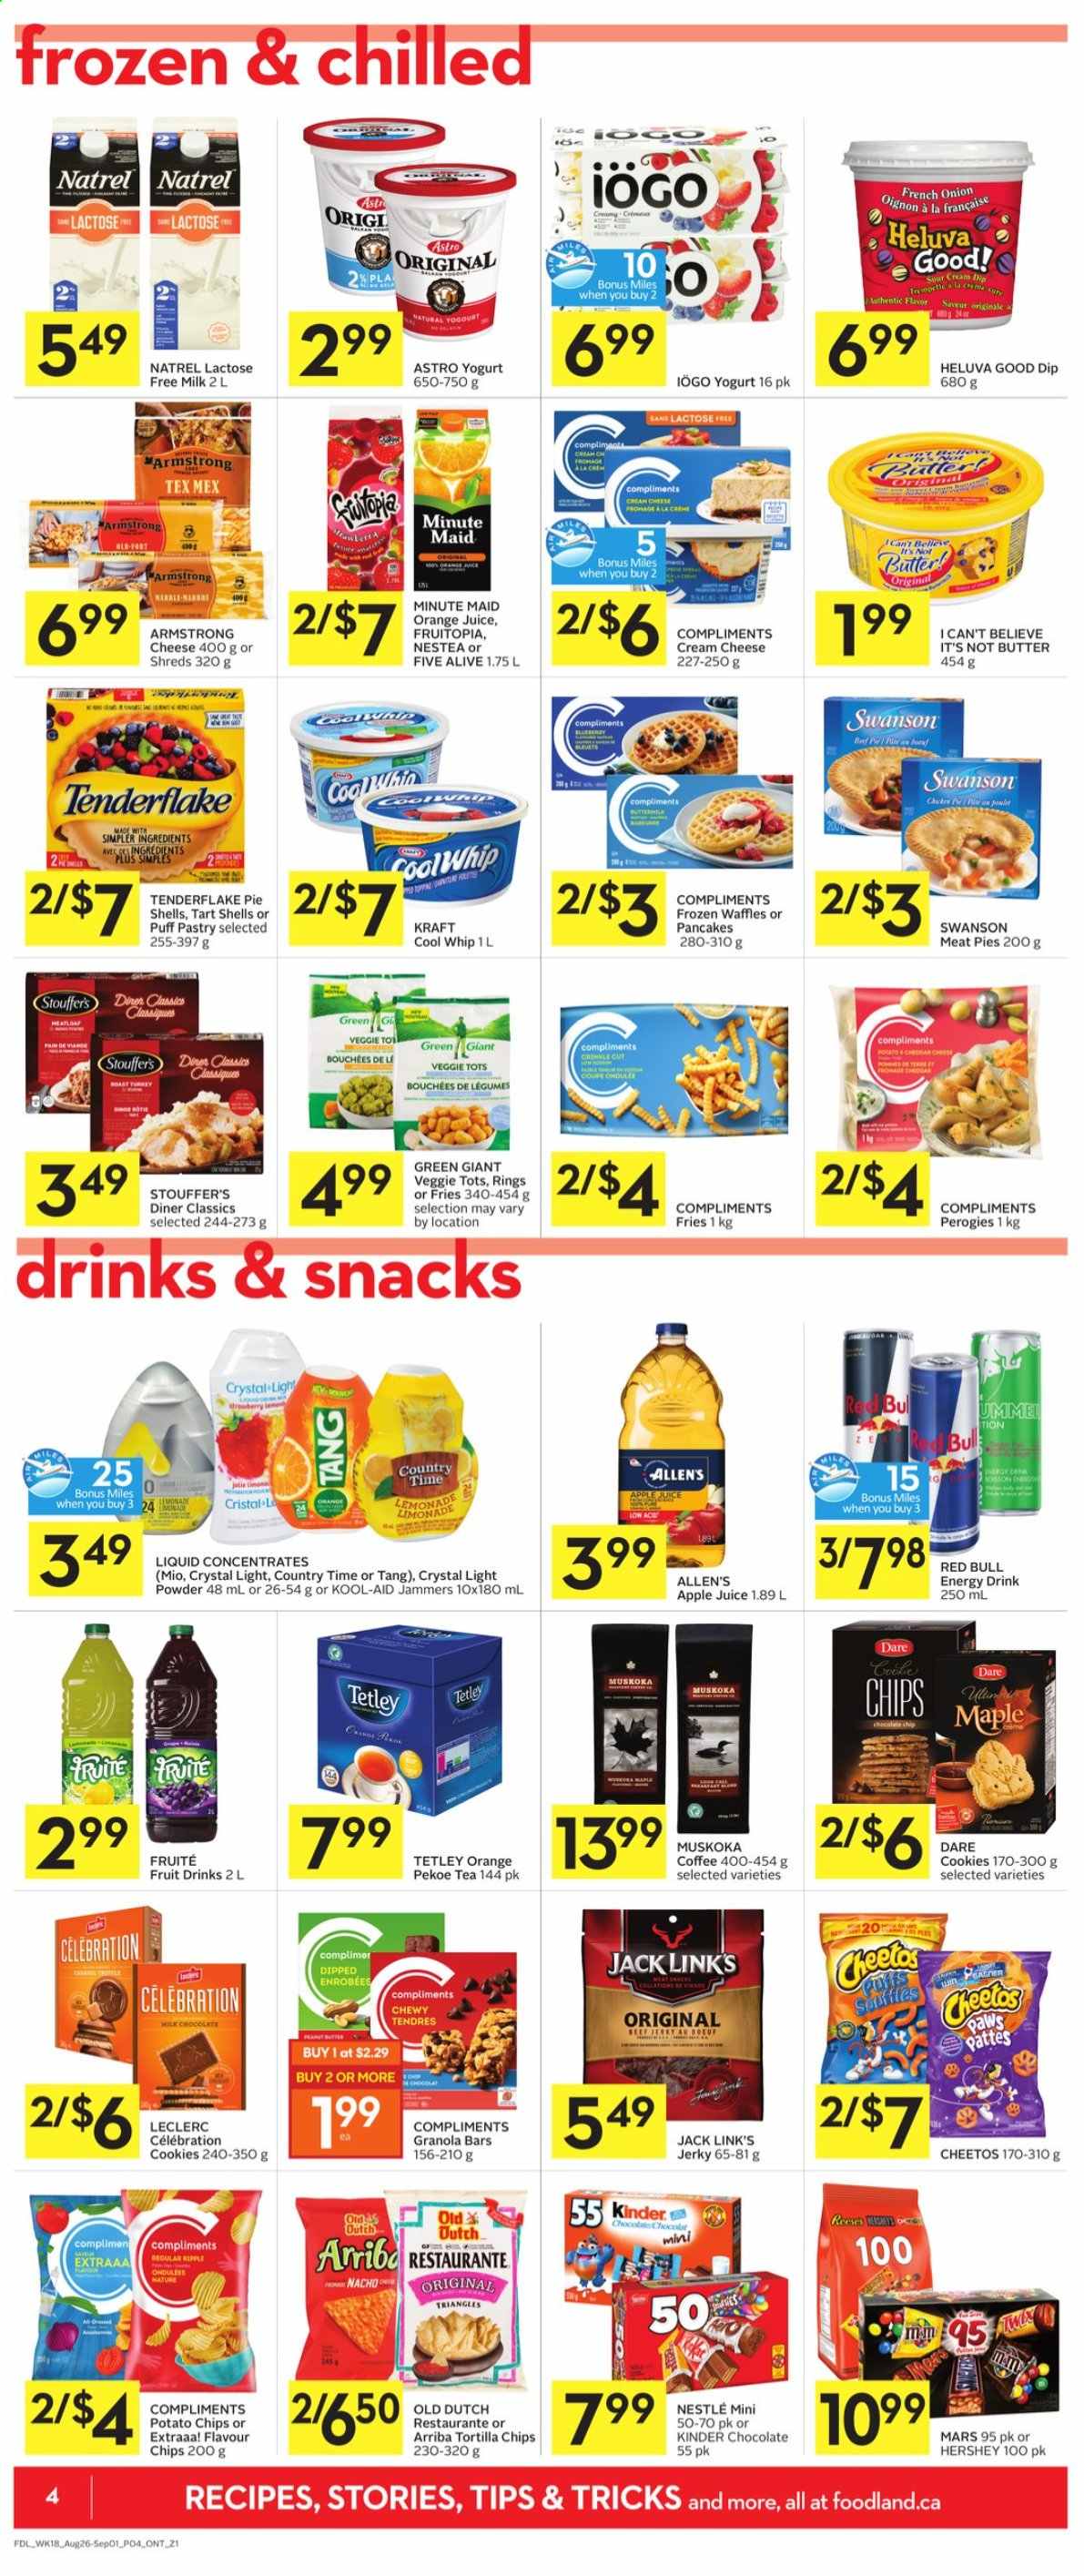 thumbnail - Foodland Flyer - August 26, 2021 - September 01, 2021 - Sales products - waffles, onion, Kraft®, jerky, cream cheese, cheese, yoghurt, milk, lactose free milk, butter, I Can't Believe It's Not Butter, Cool Whip, sour cream, Reese's, Stouffer's, potato fries, cookies, Mars, Celebration, tortilla chips, potato chips, Cheetos, Jack Link's, granola bar, apple juice, lemonade, orange juice, juice, energy drink, Red Bull, Country Time, fruit punch, tea, coffee, Ron Pelicano, Nestlé. Page 4.